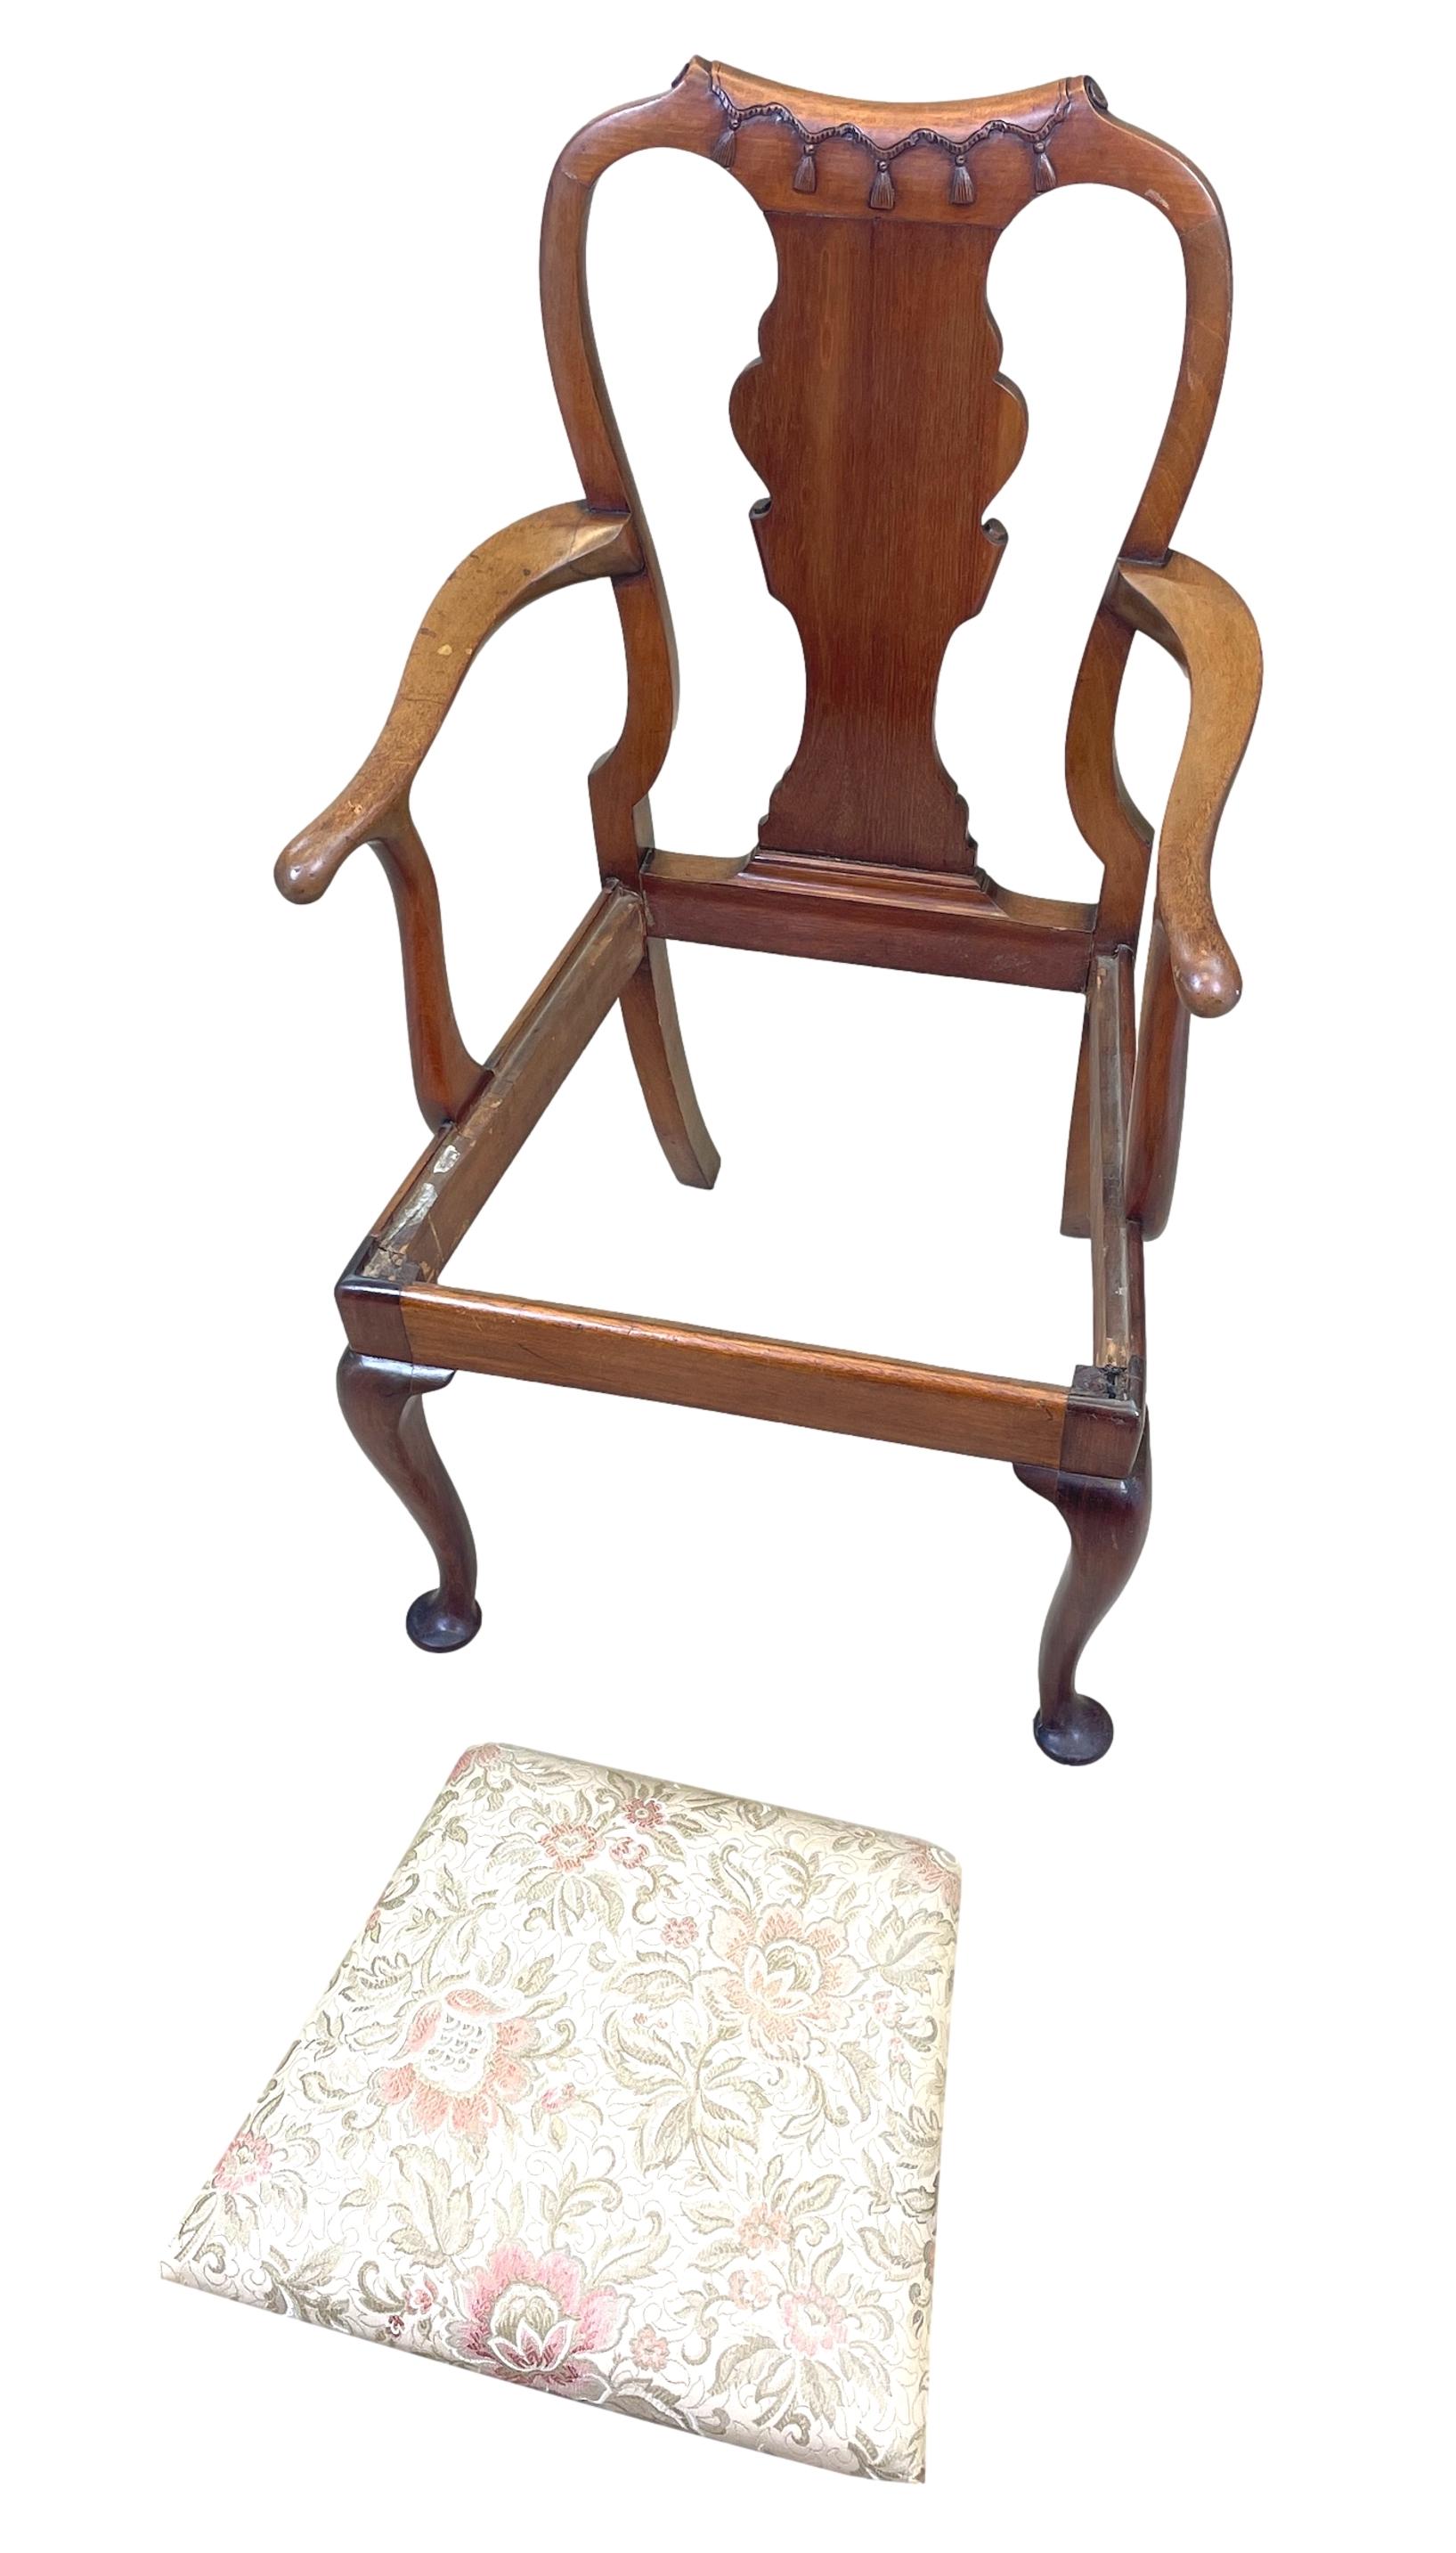 A very attractive and good quality and early 20th century Queen Anne style walnut childs chair having carved decoration to top of well figured splat back over drop in seat raised on elegant Cabriole legs. 

Childrens, or Childs Chairs as the name